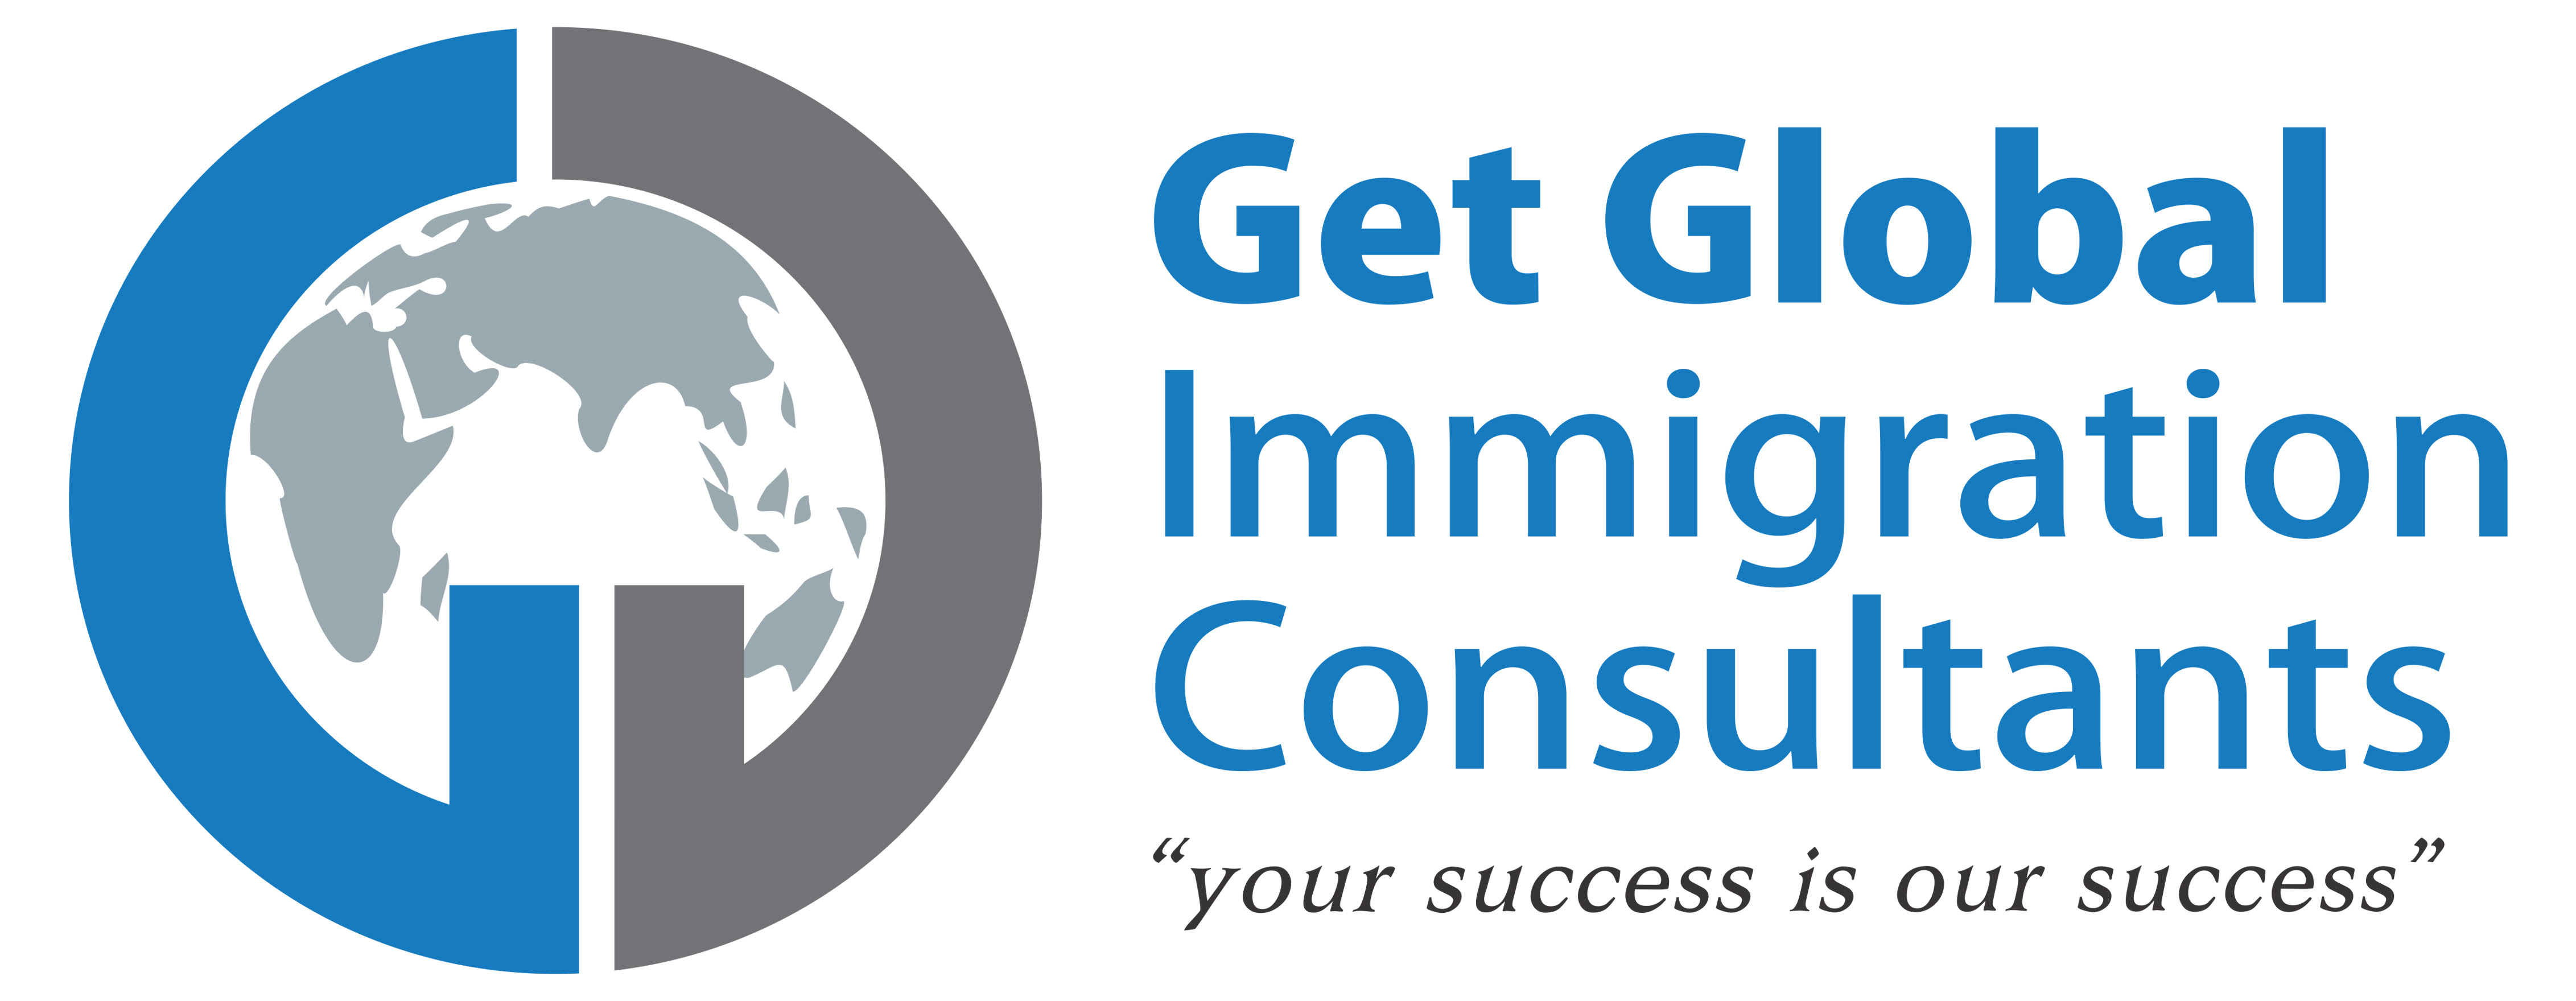 consultation on immigration